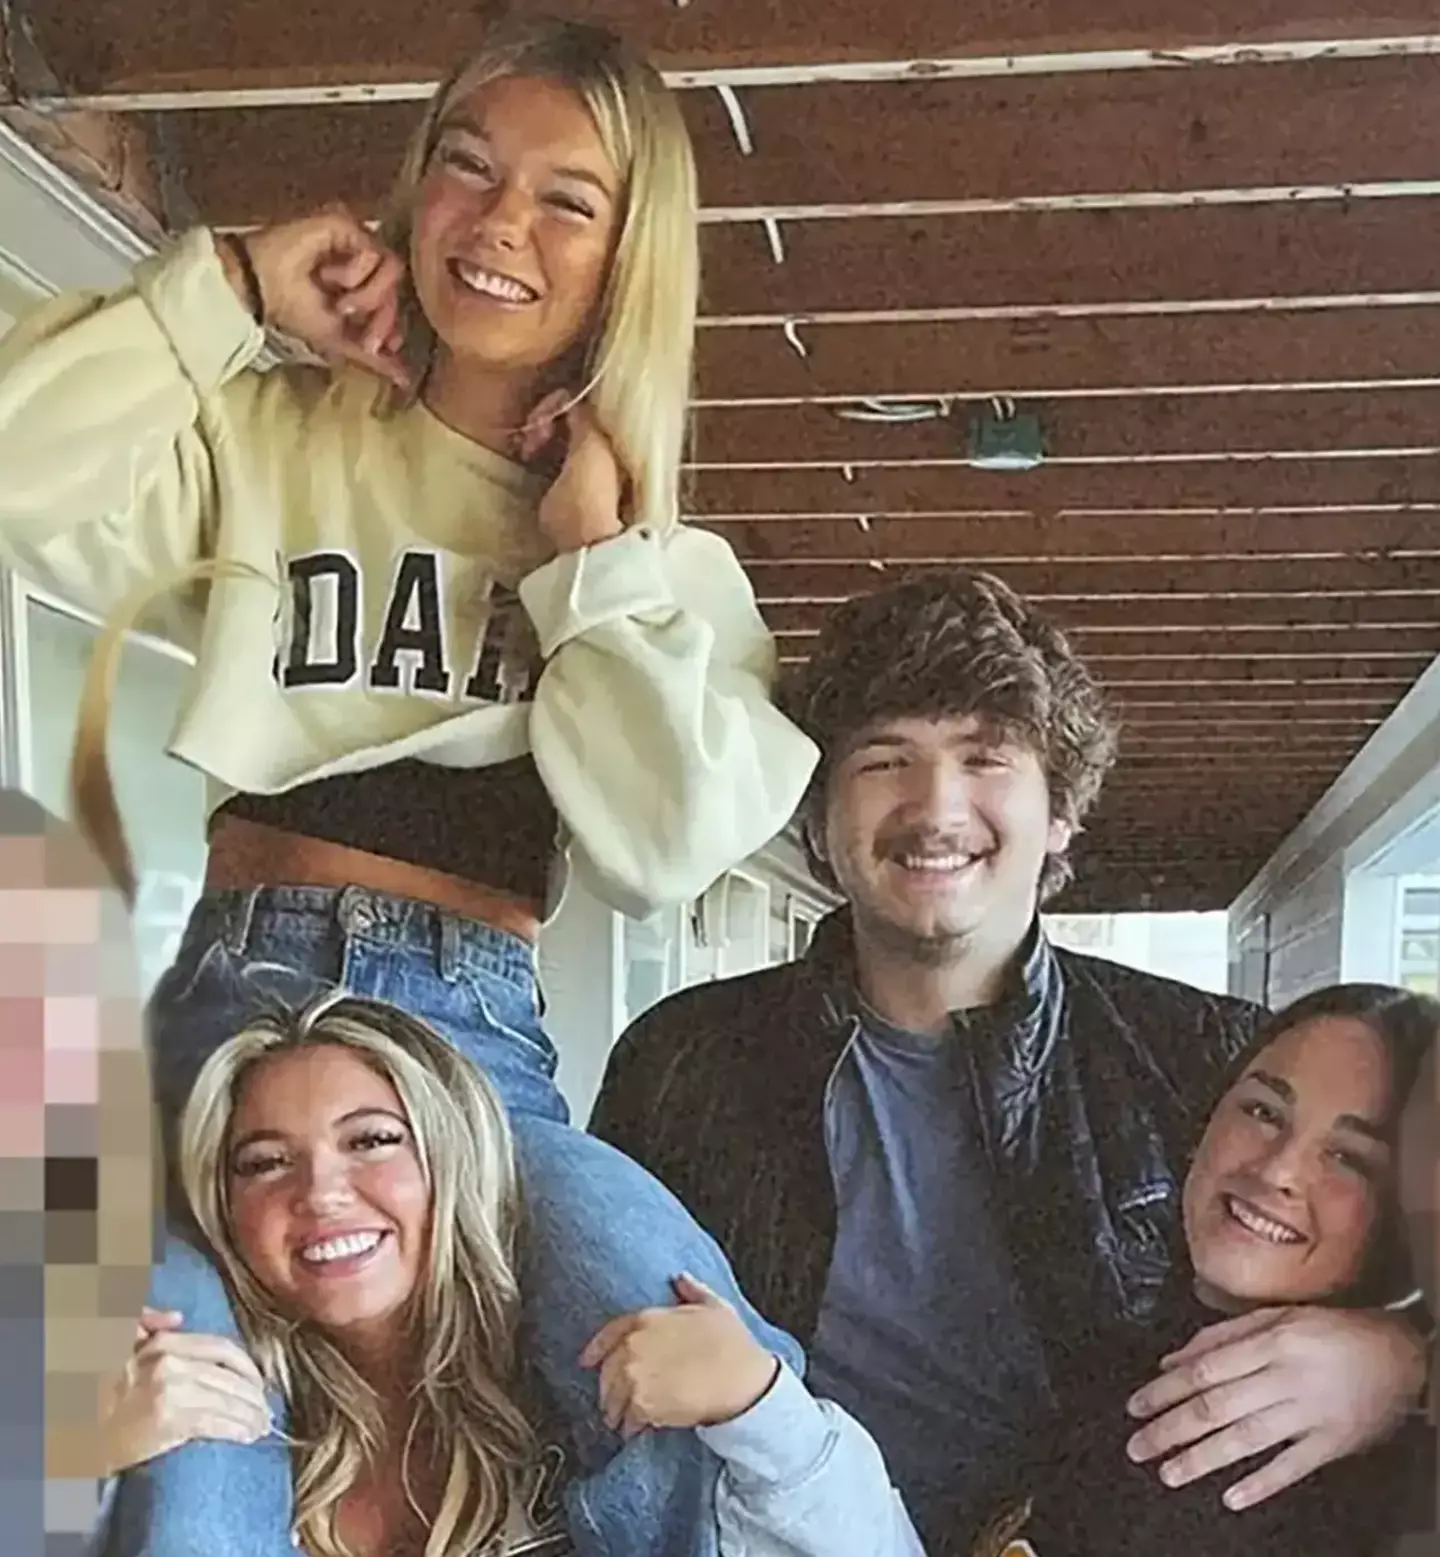 Kailee Golcalves, Maddie Mogen, Xana Kernodle and Ethan Chapin were all stabbed to death in their student home.